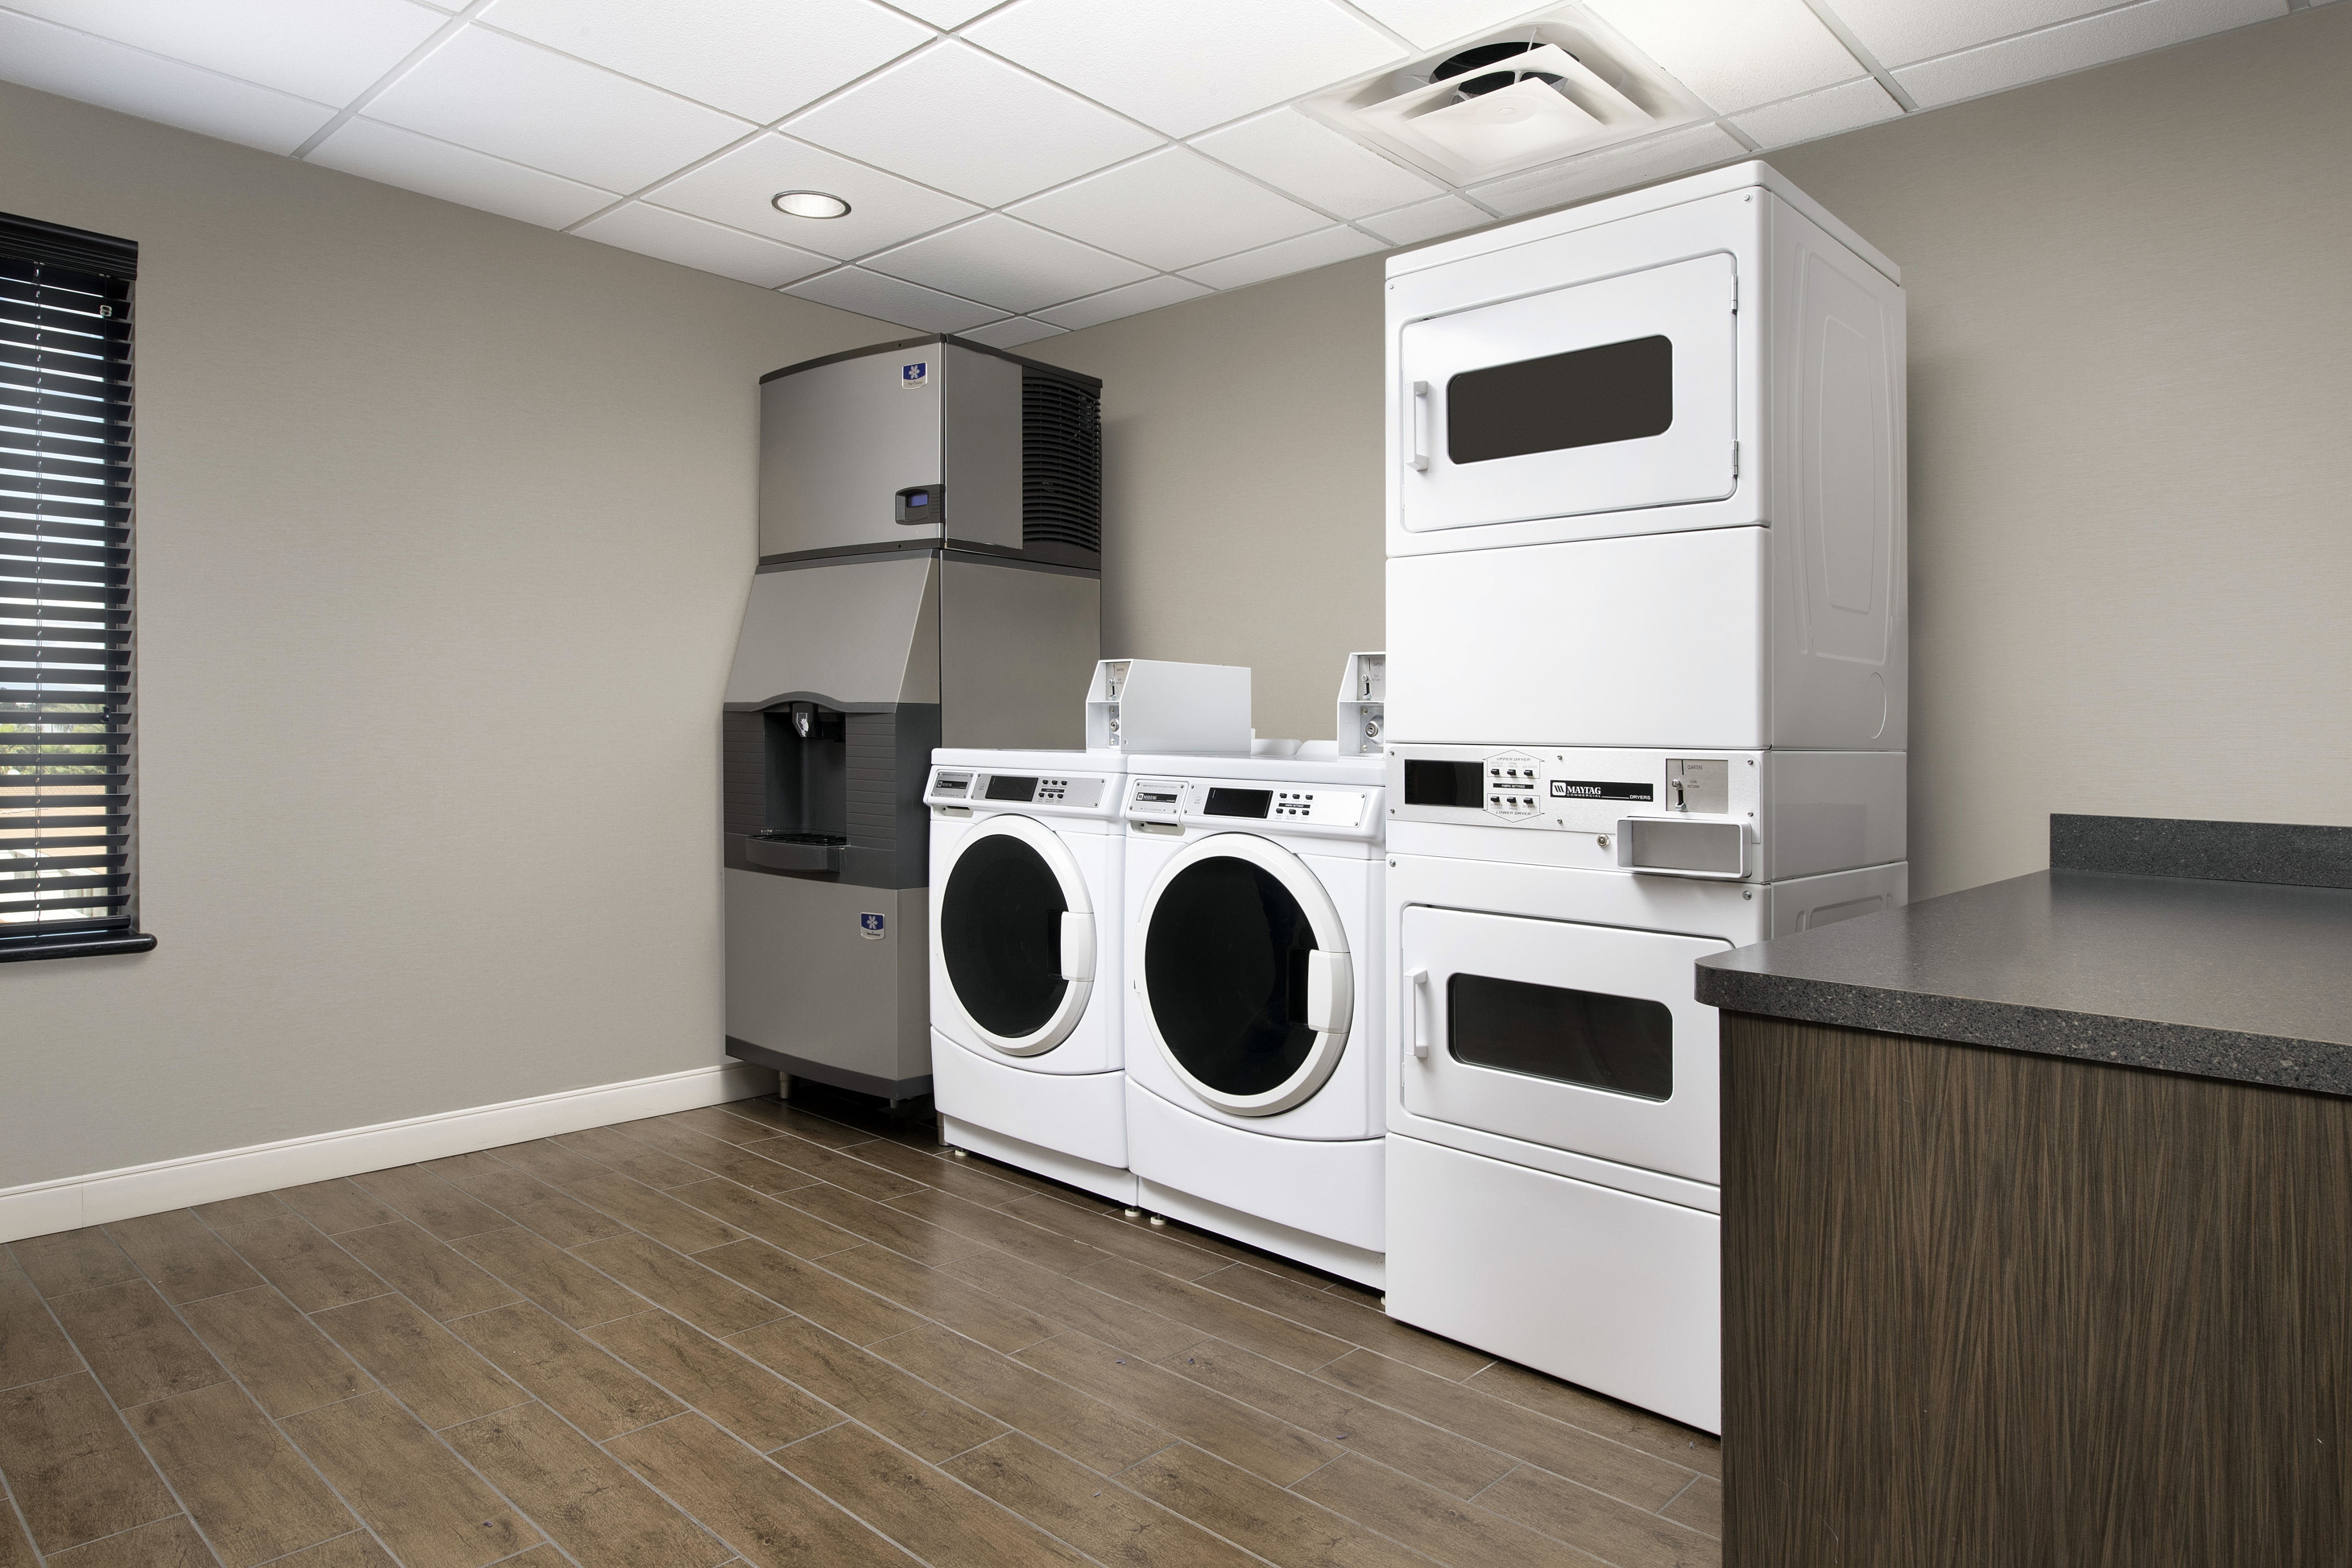 Laundry area with machines